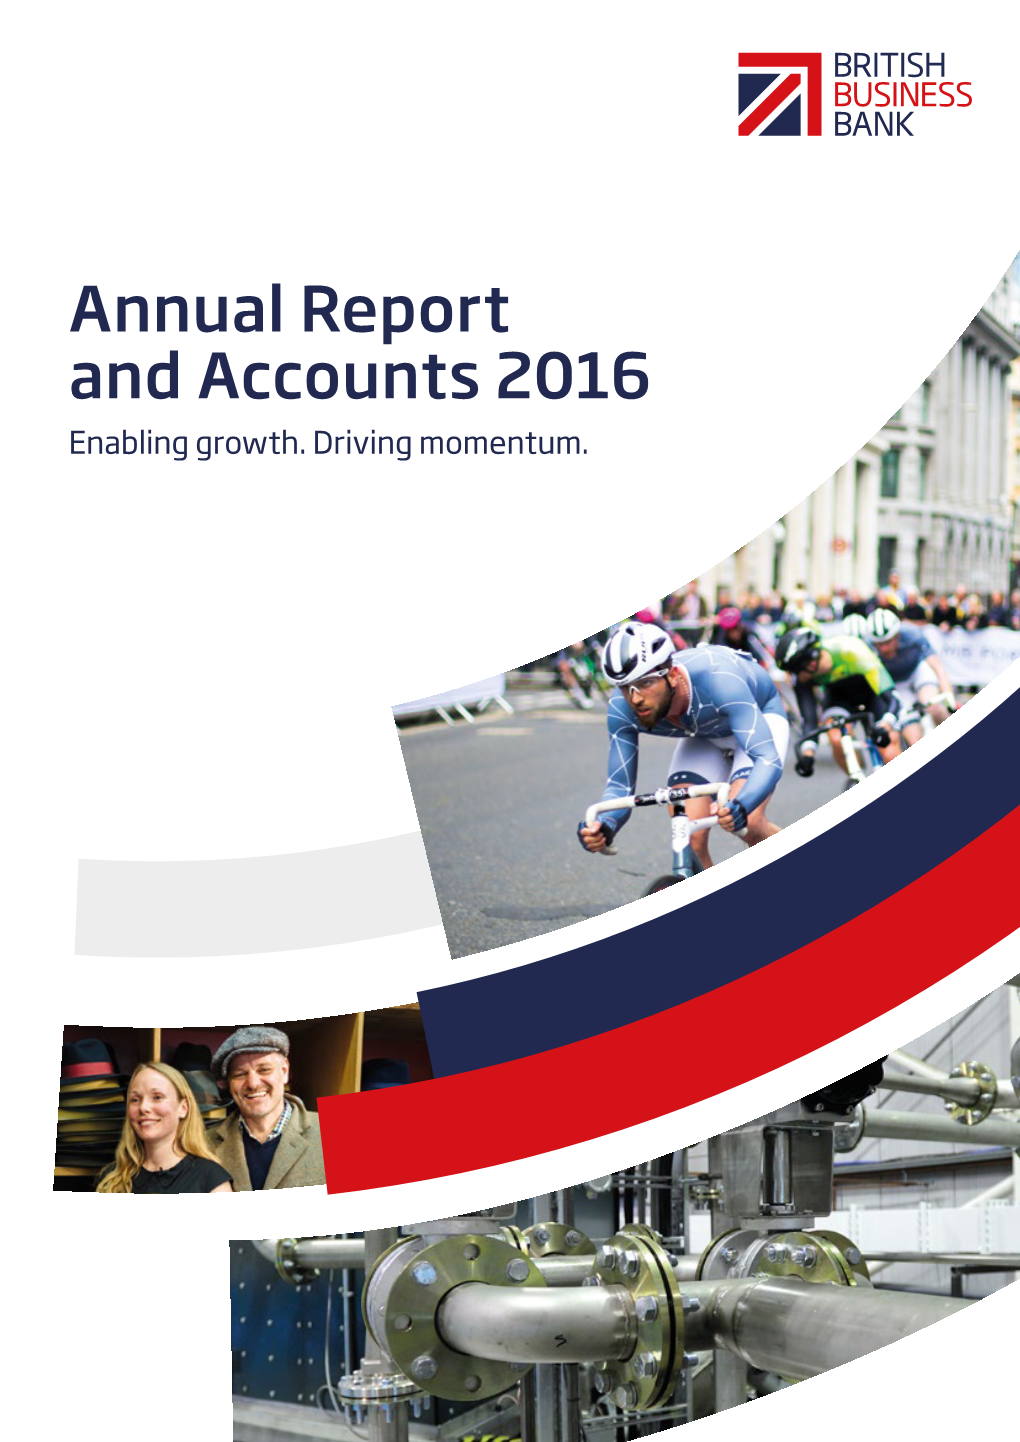 British Business Bank Annual Report and Accounts 2016